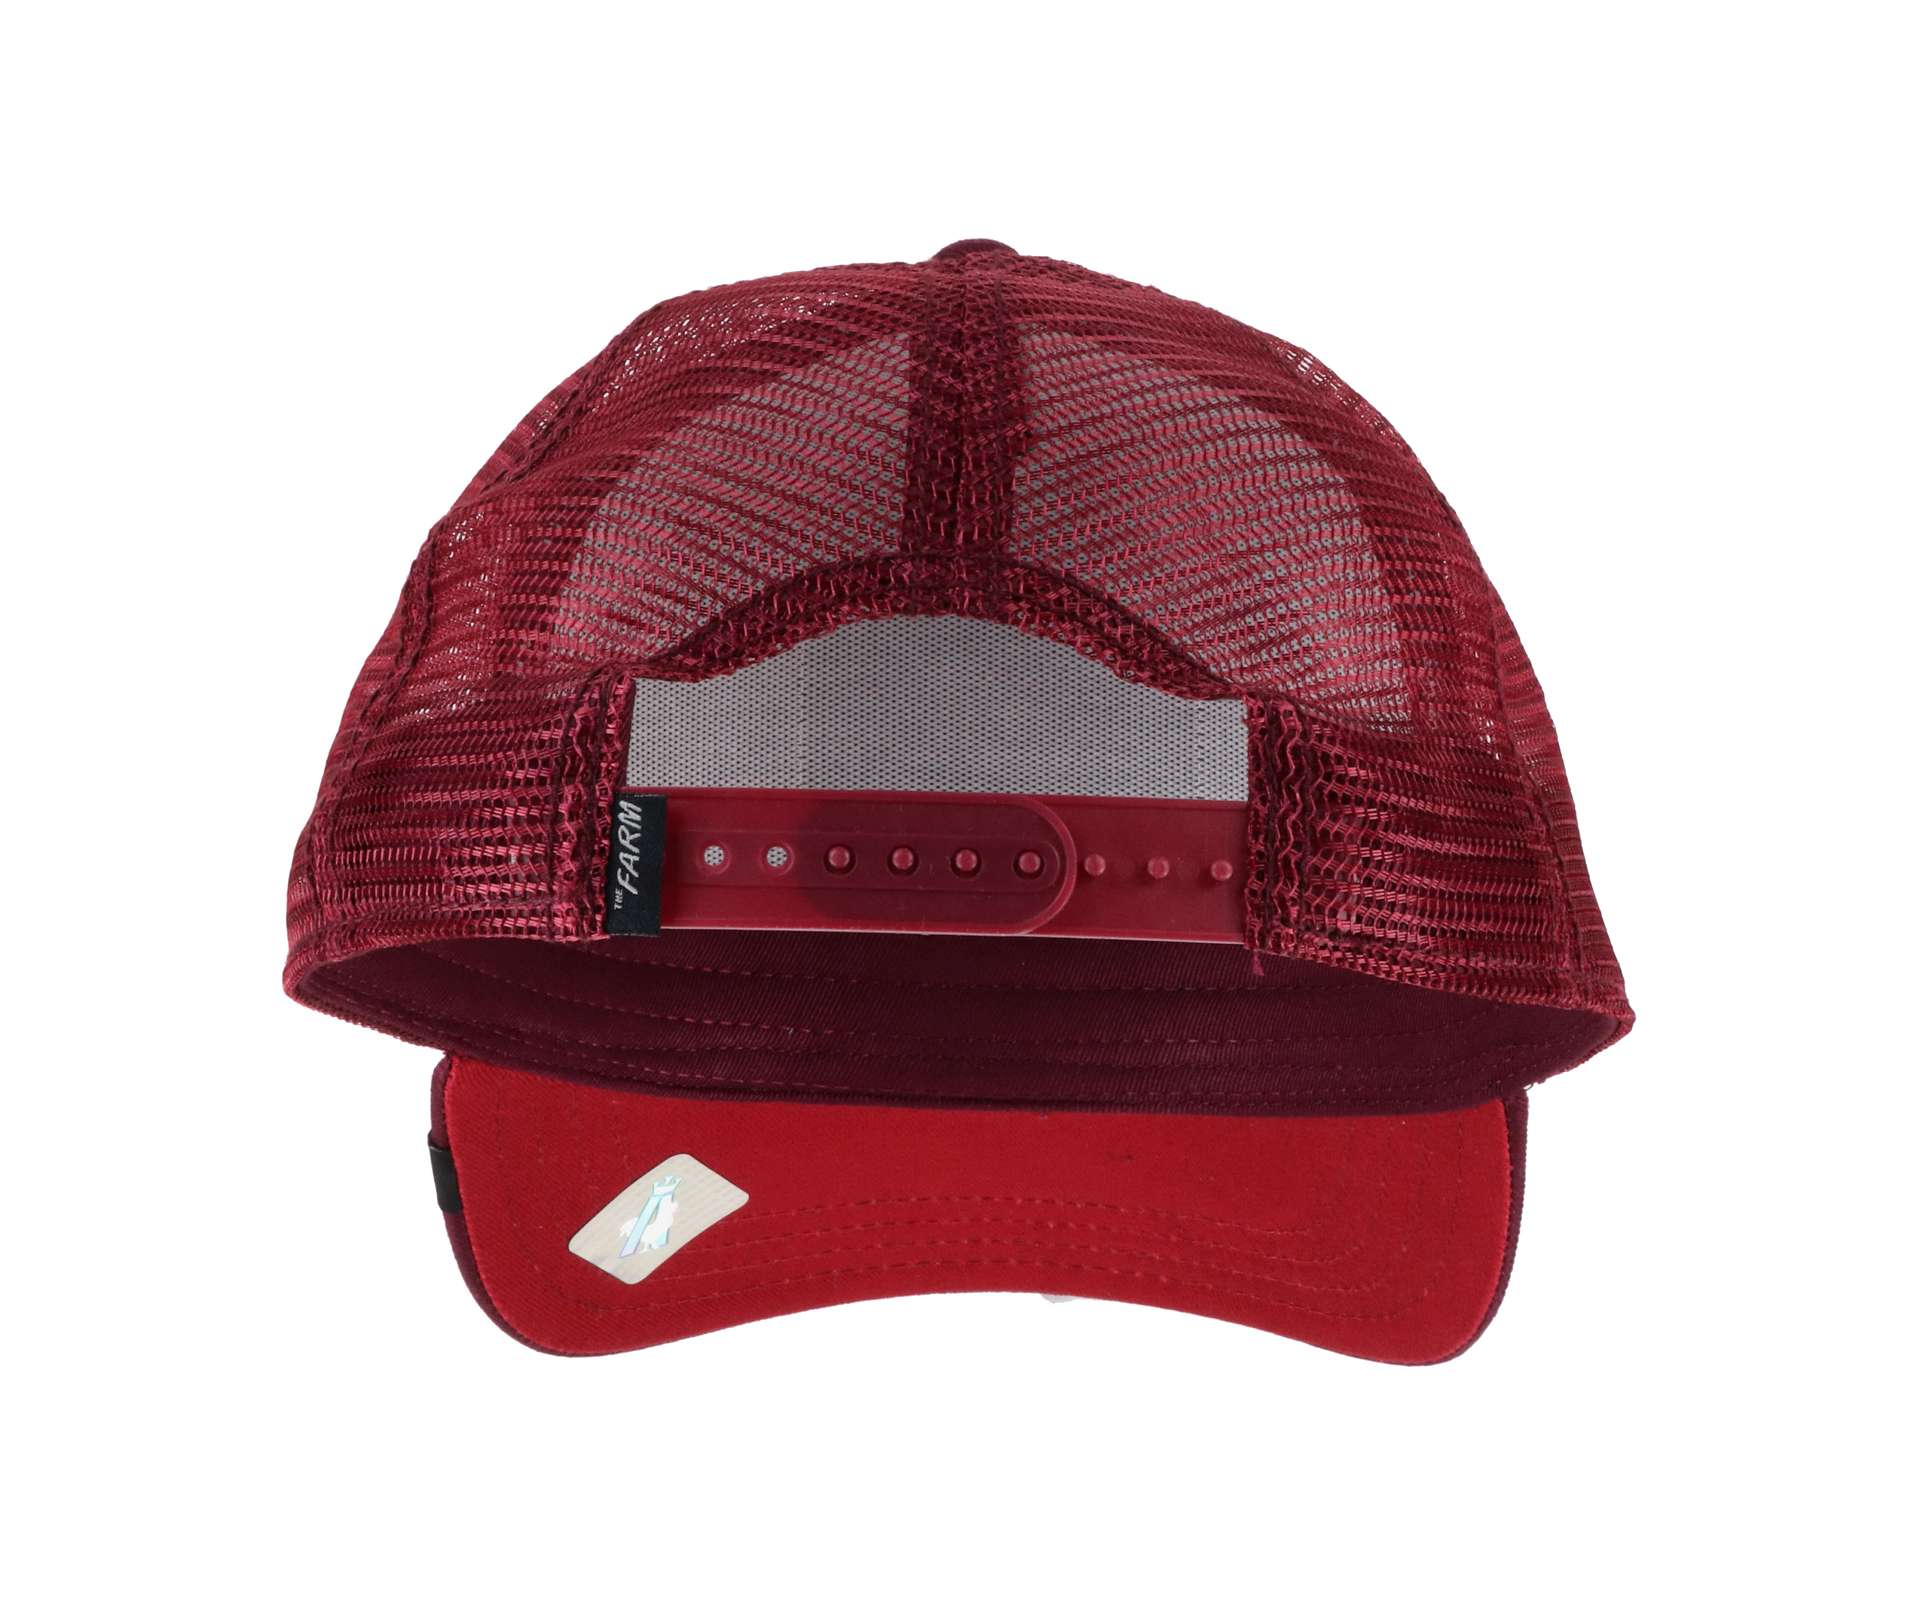 The Panther Maroon A-Frame Adjustable Trucker Cap Goorin Bros